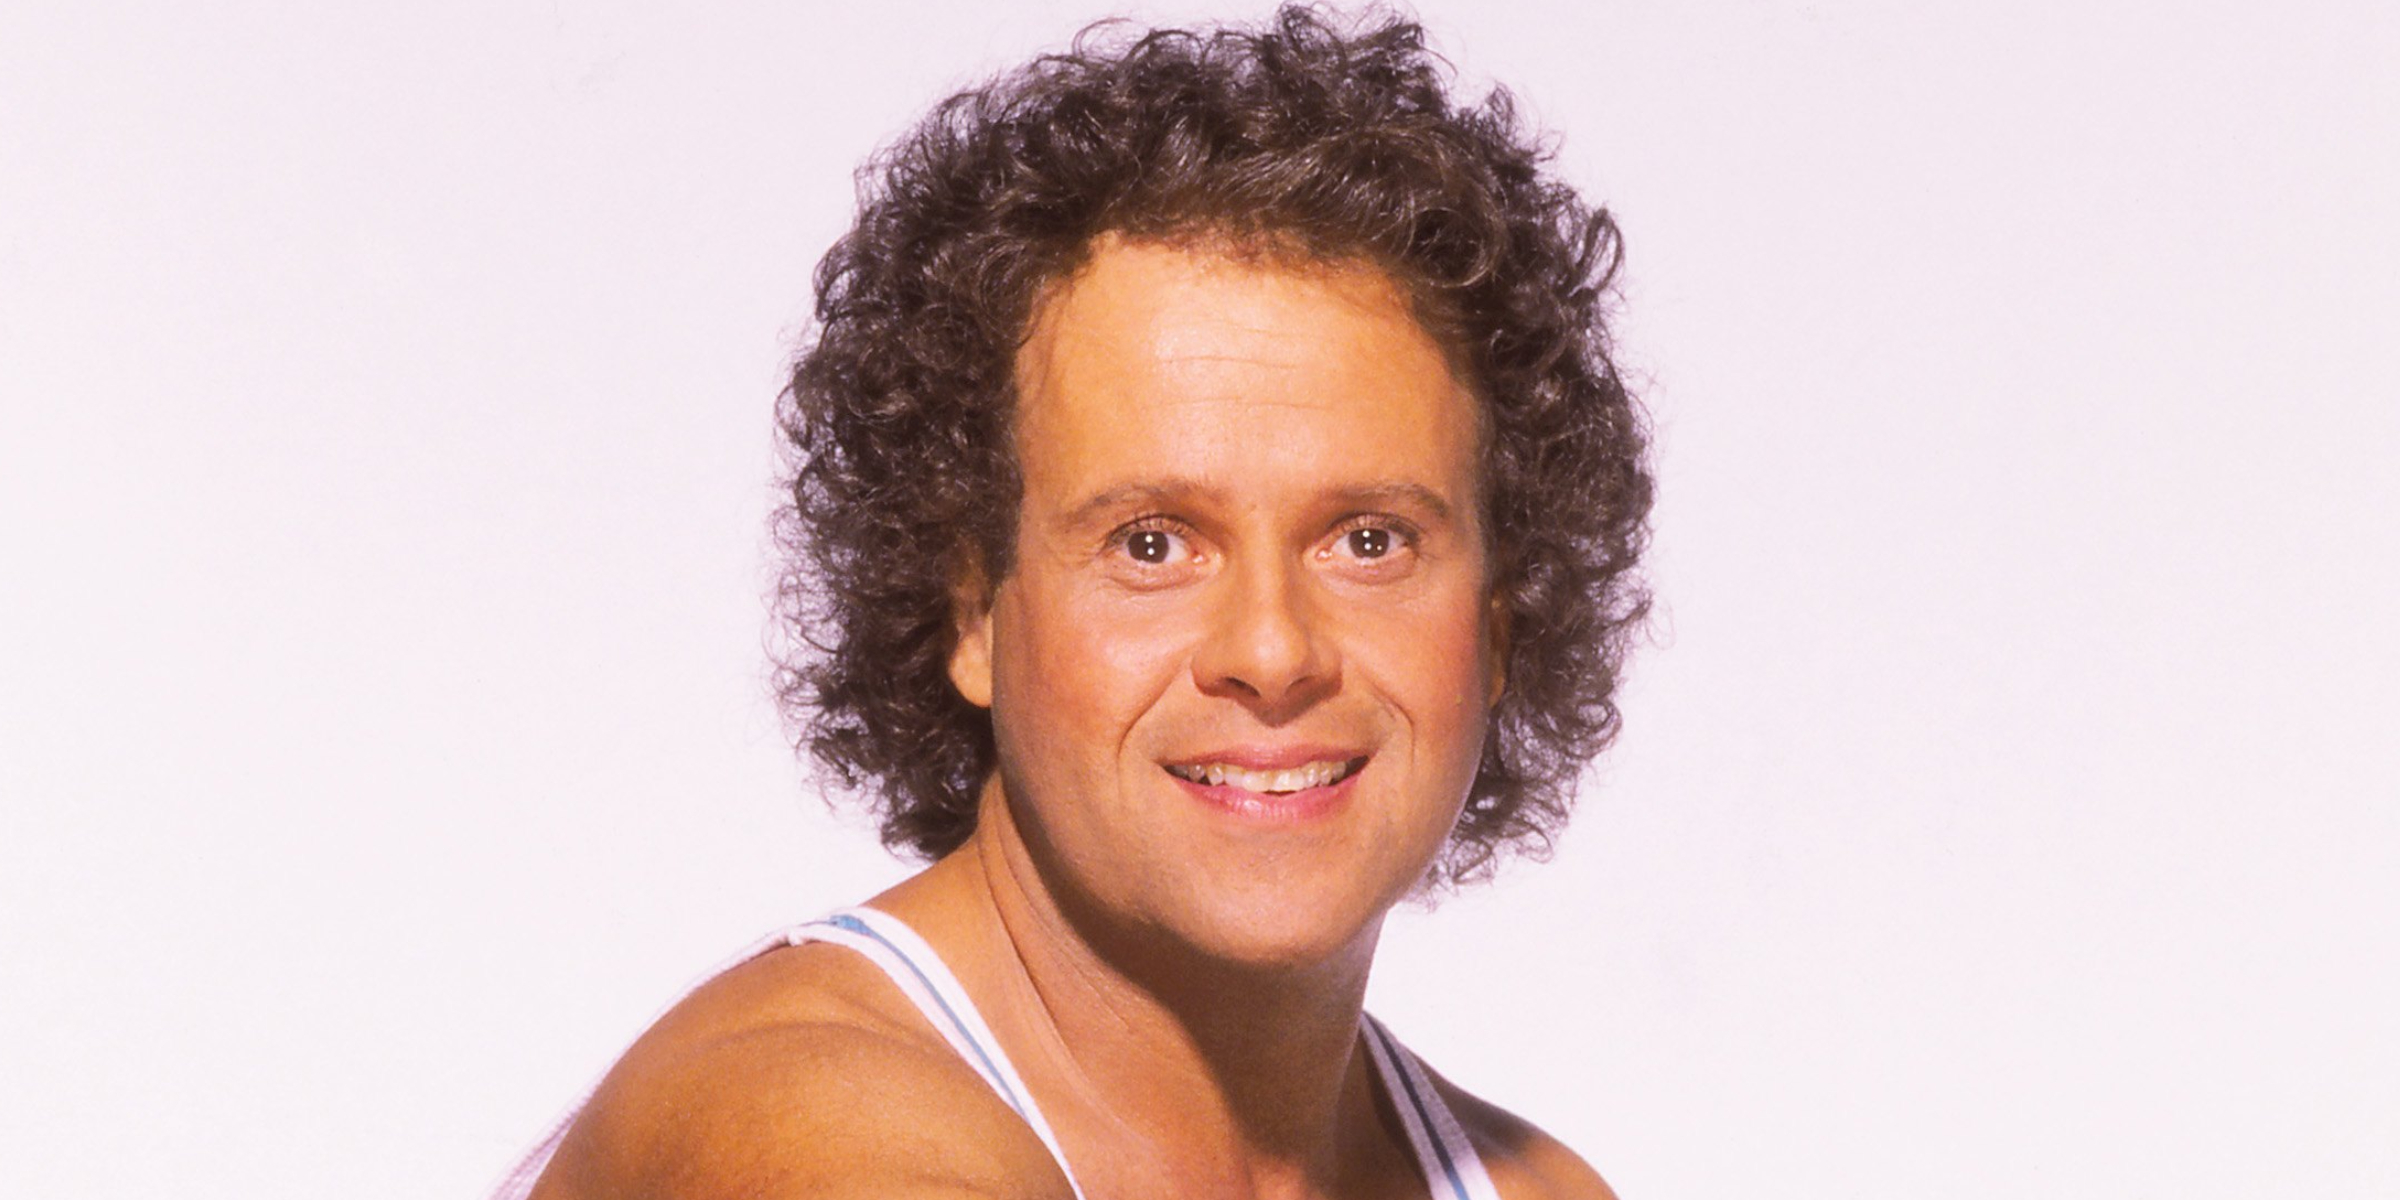 Richard Simmons | Fuente: Getty Images